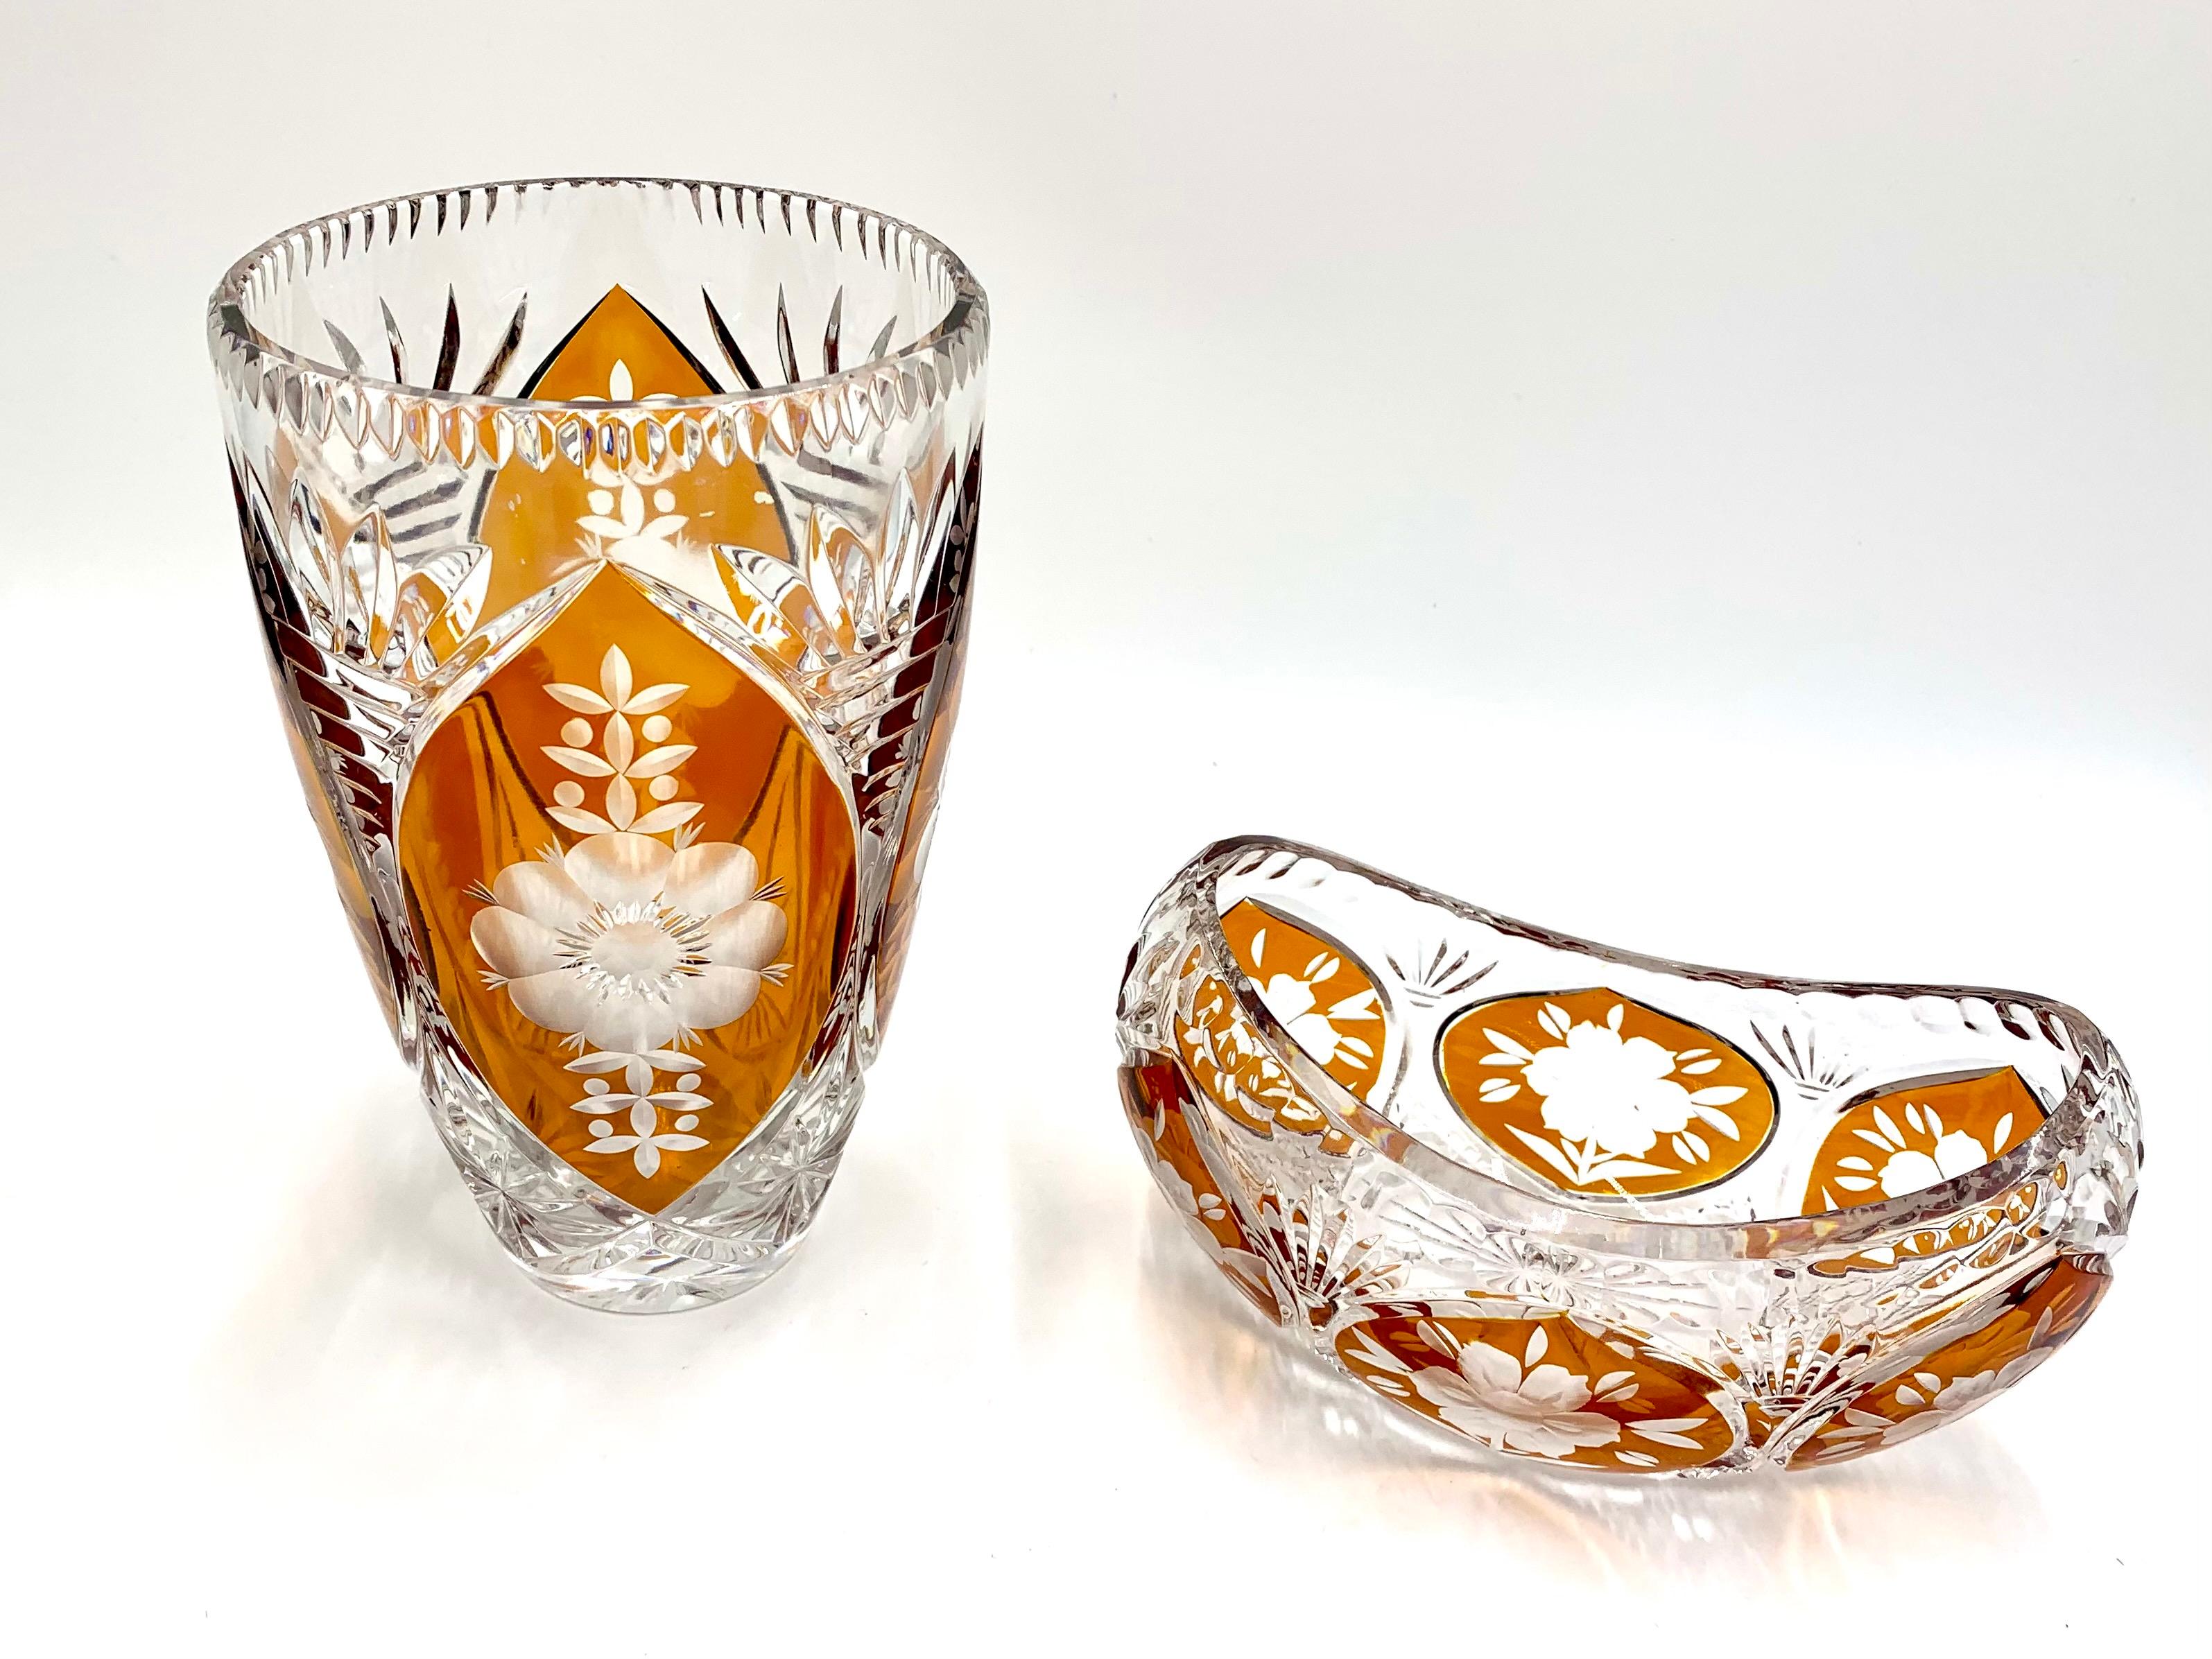 A set of a vase with an oblong bowl for sweets.

Made of crystal, produced in Poland in the 1960s.

Vase height: 21, diameter 12 cm

Bowl: 10cm high, 17cm wide, 10cm deep.